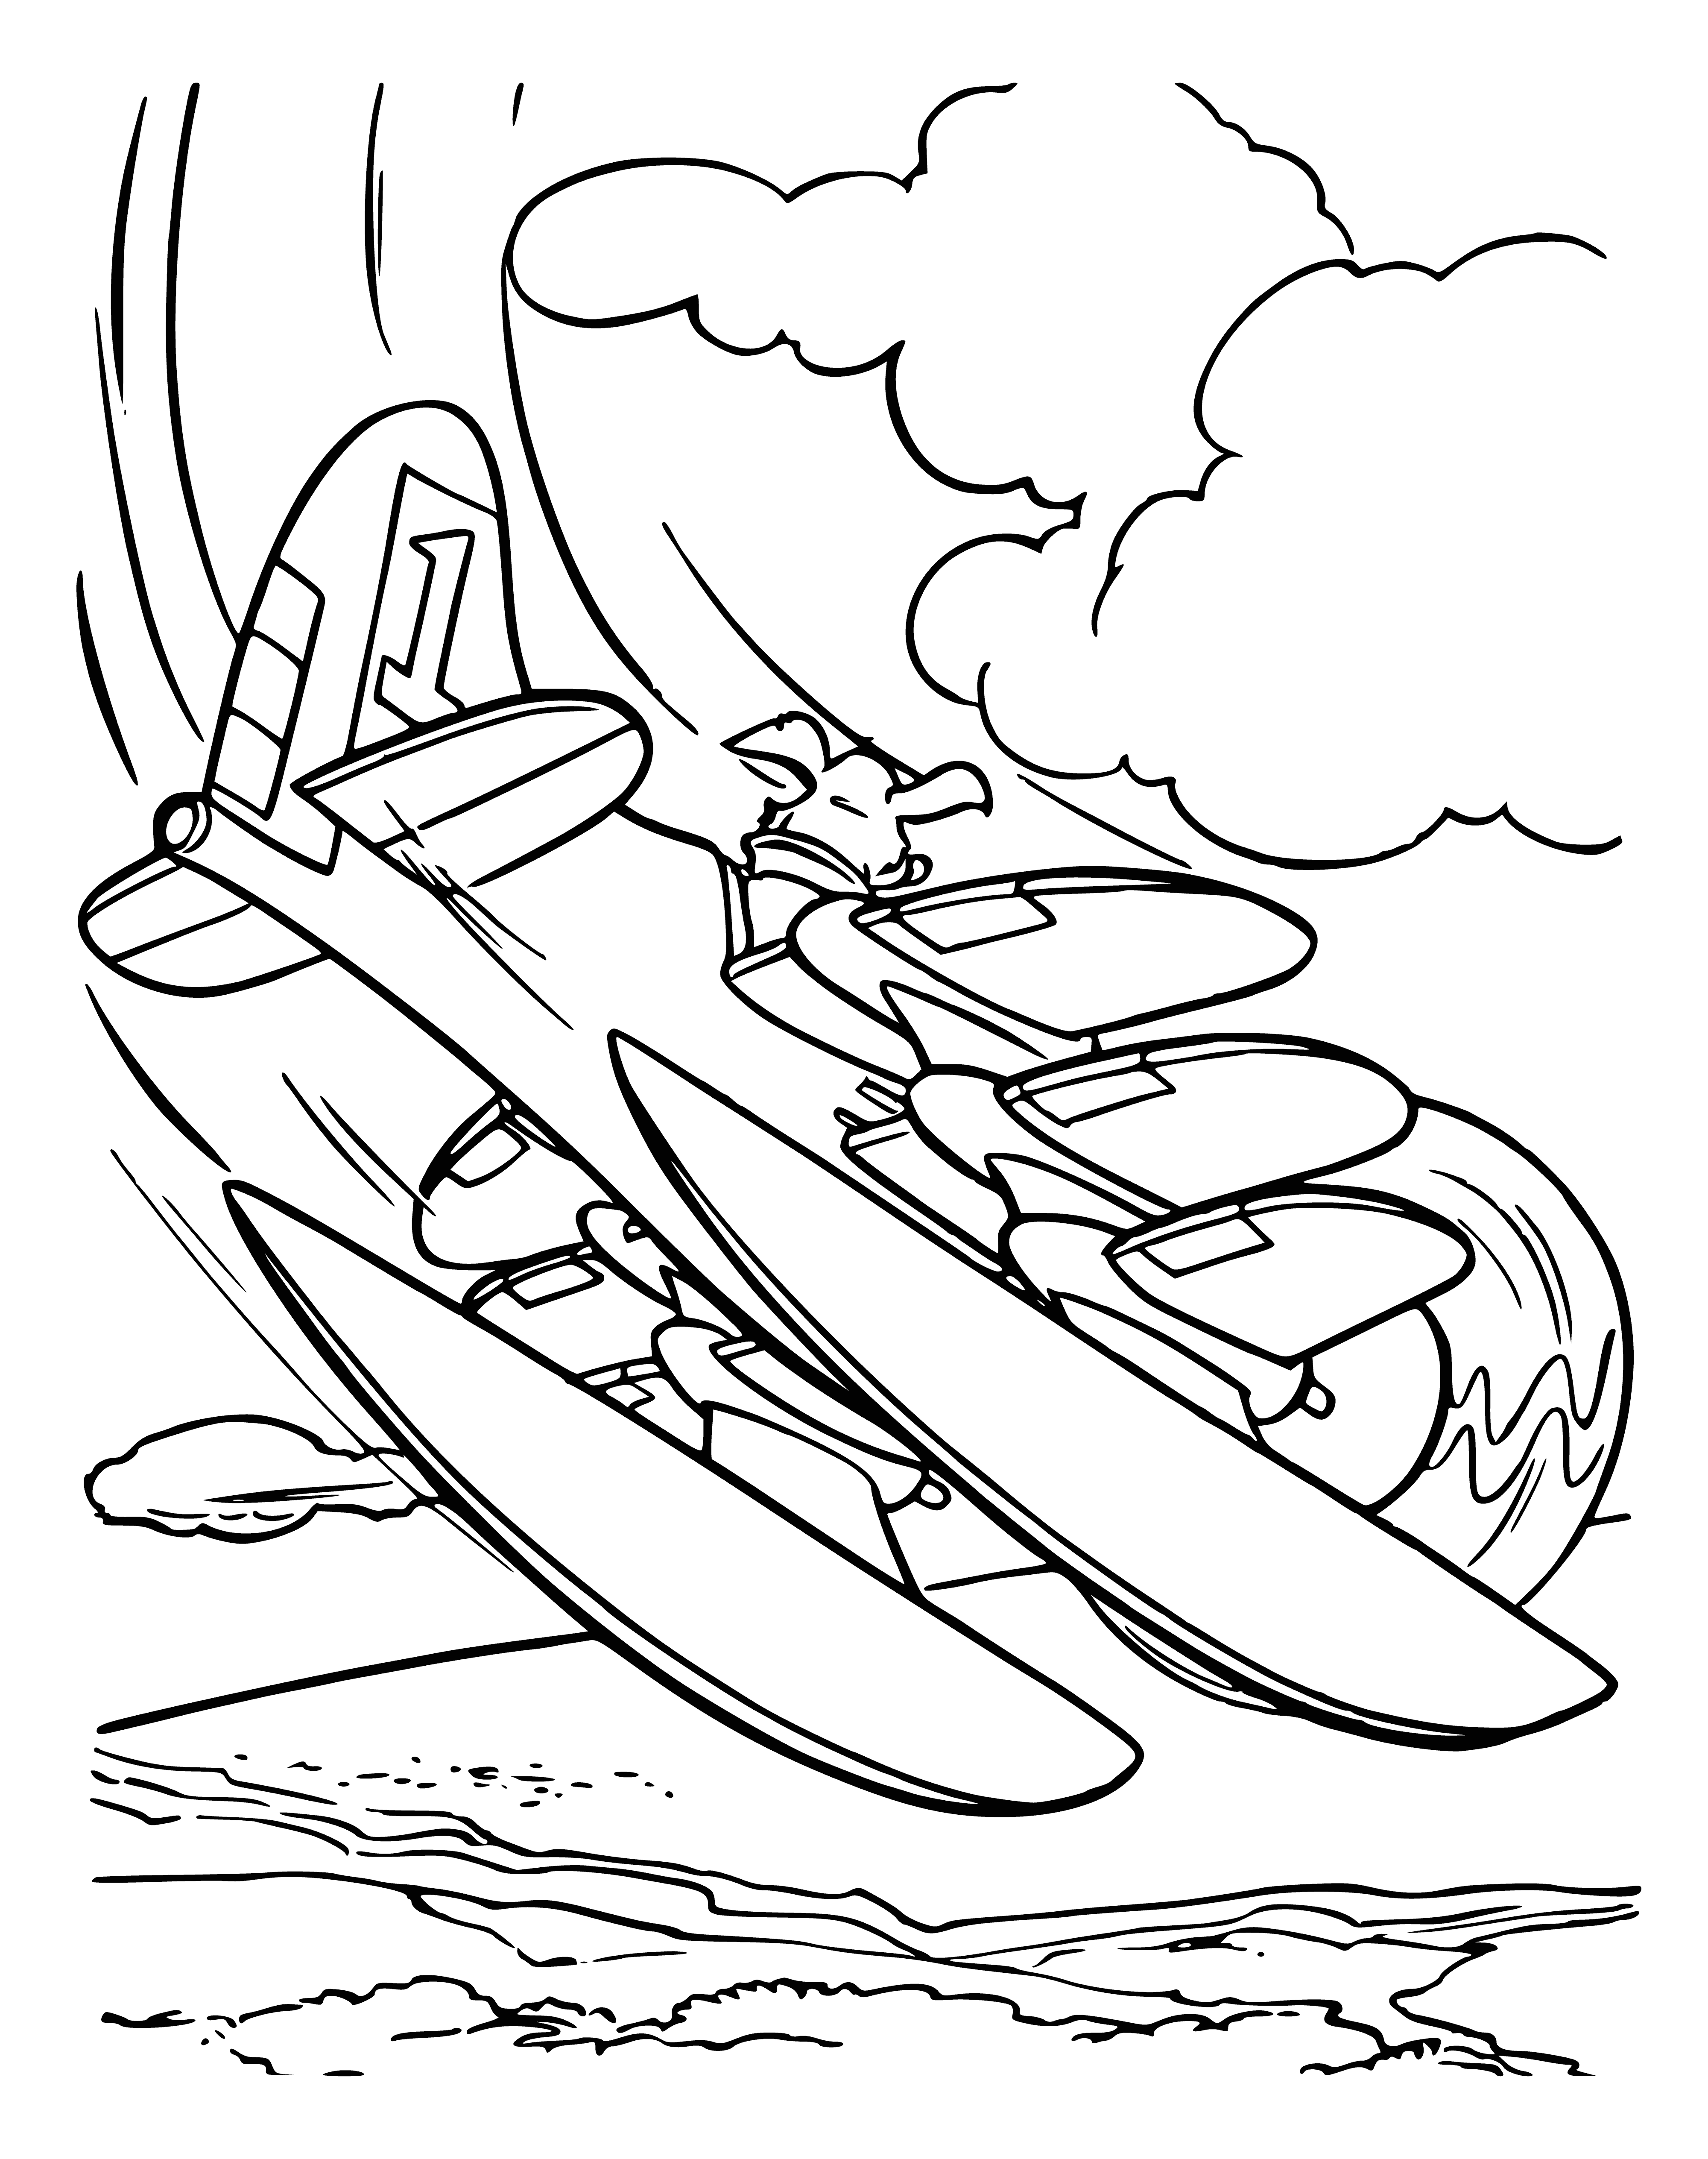 coloring page: Small, rectangular plane w/ green, yellow, red; propeller front, cockpit middle w/ two seats.